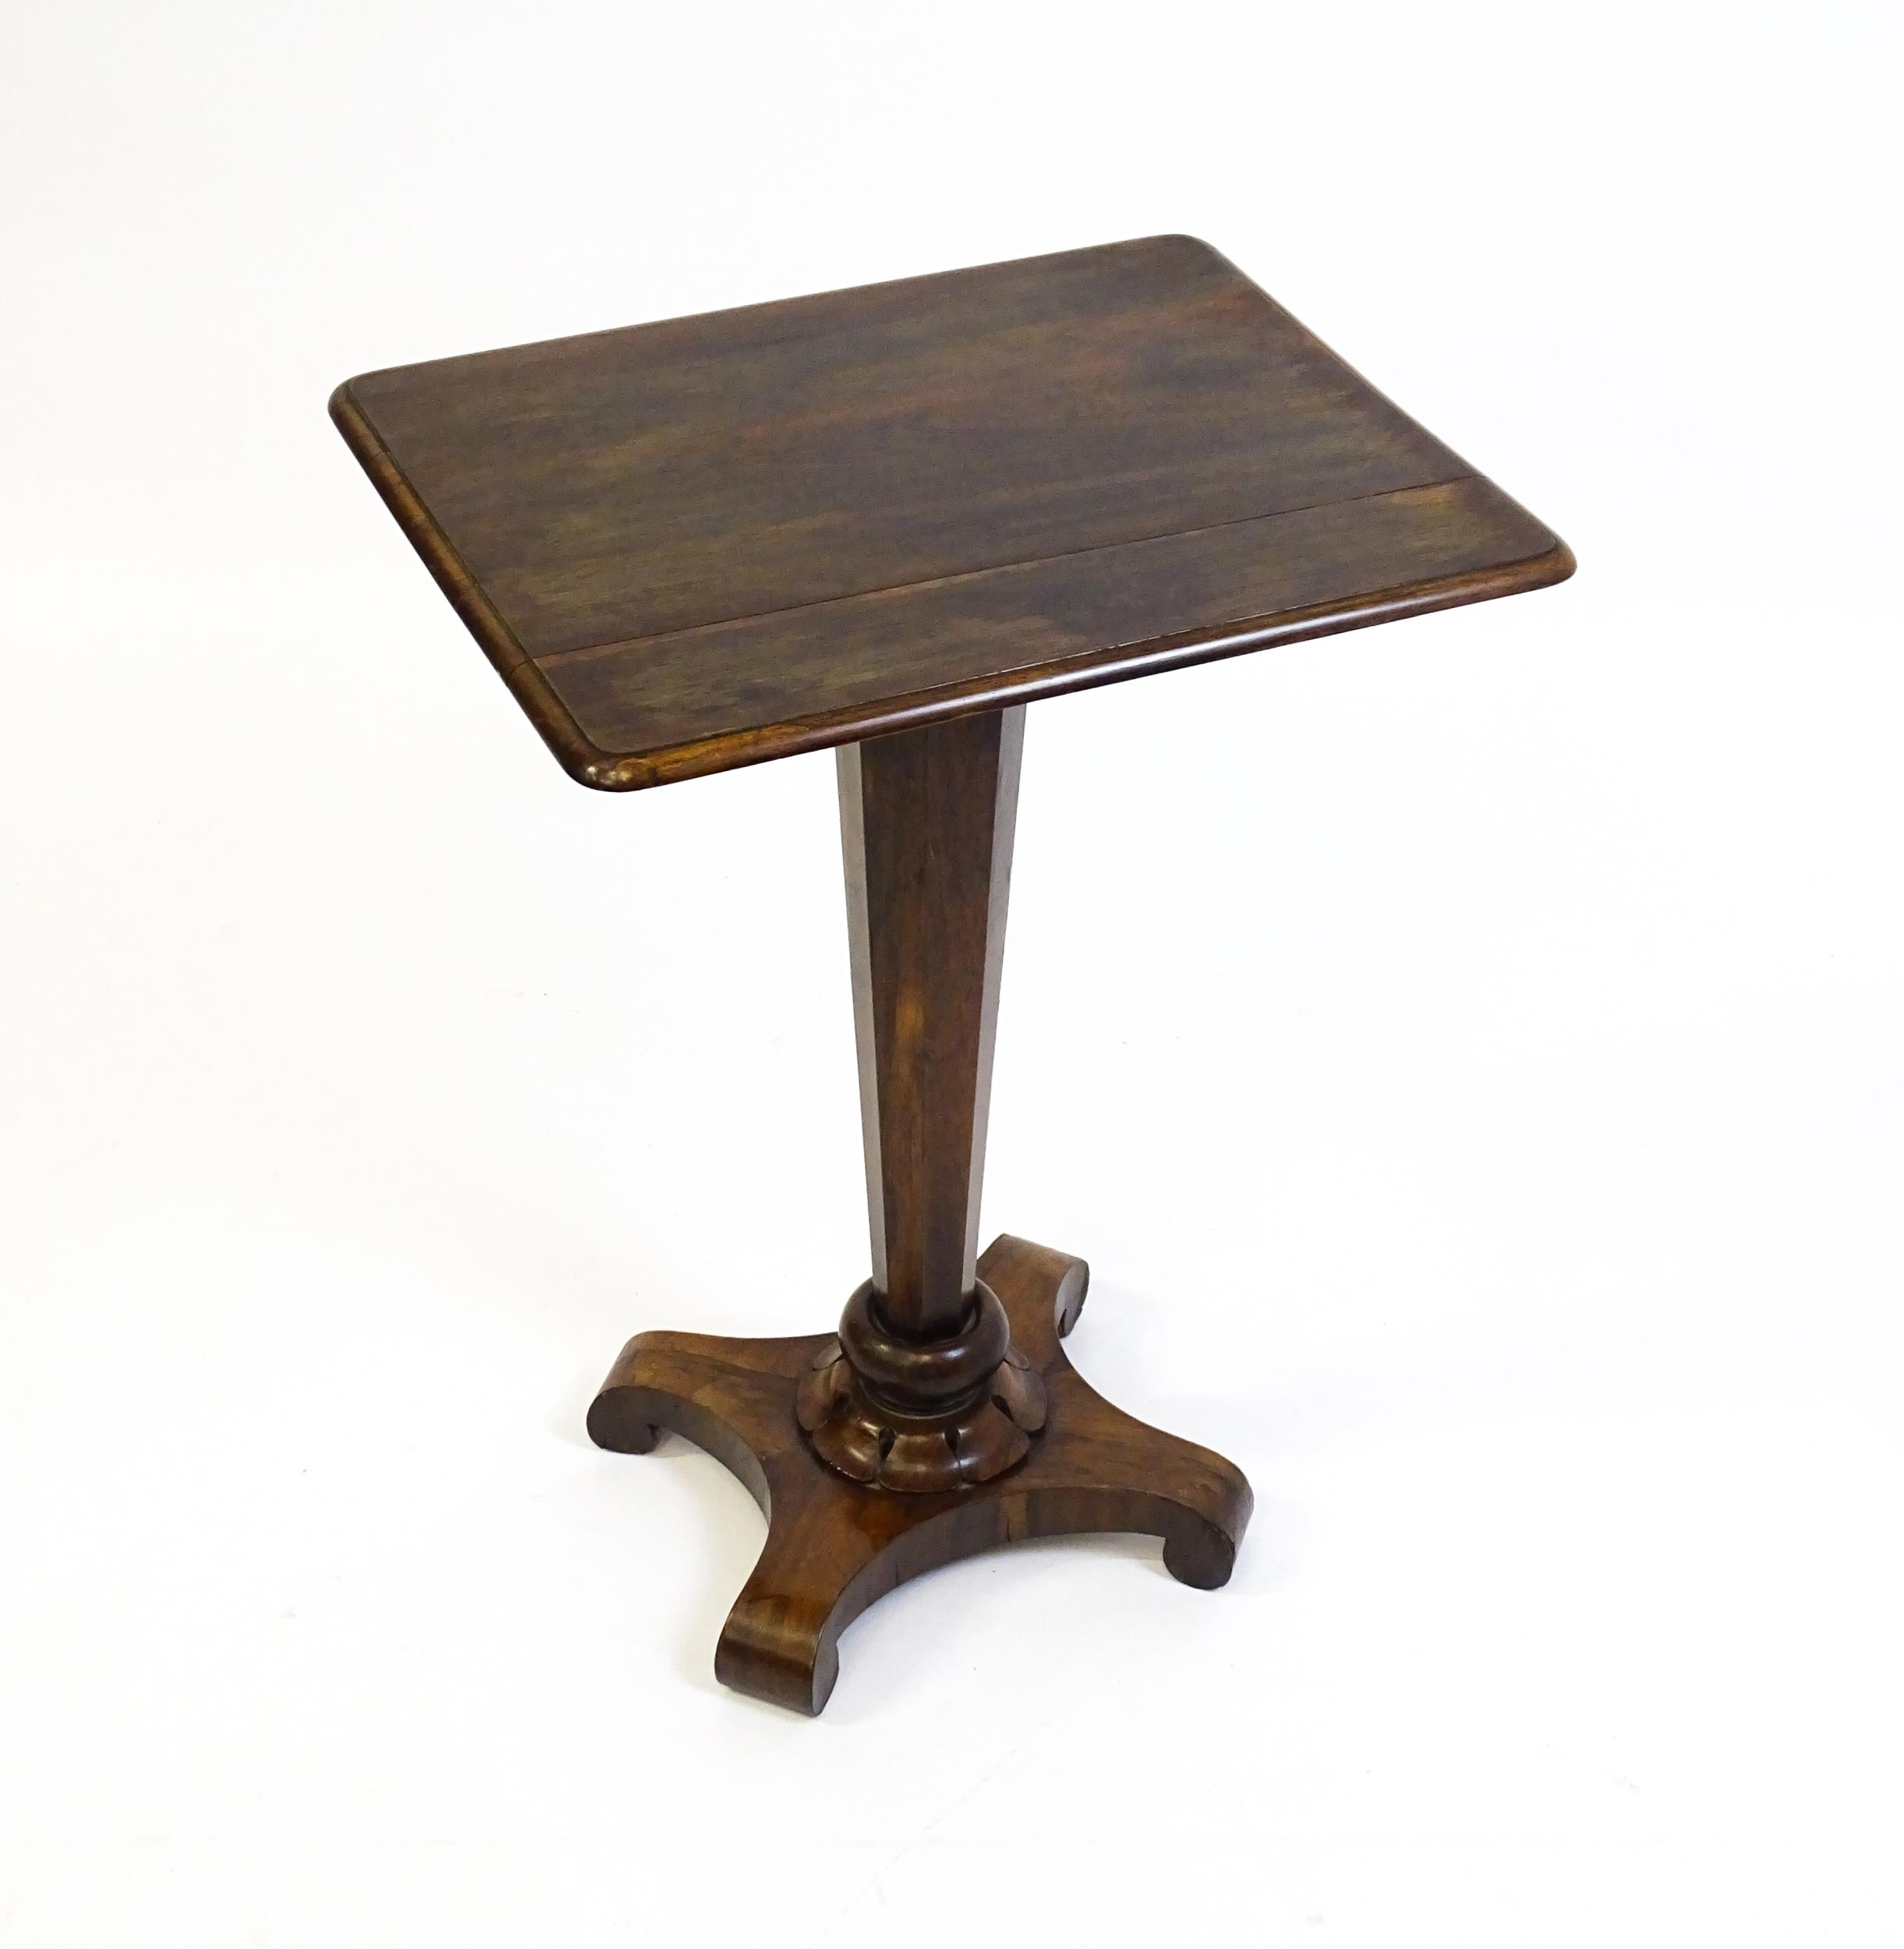 A 19thC rosewood occasional table with a canted pedestal above a carved plinth and quatre form